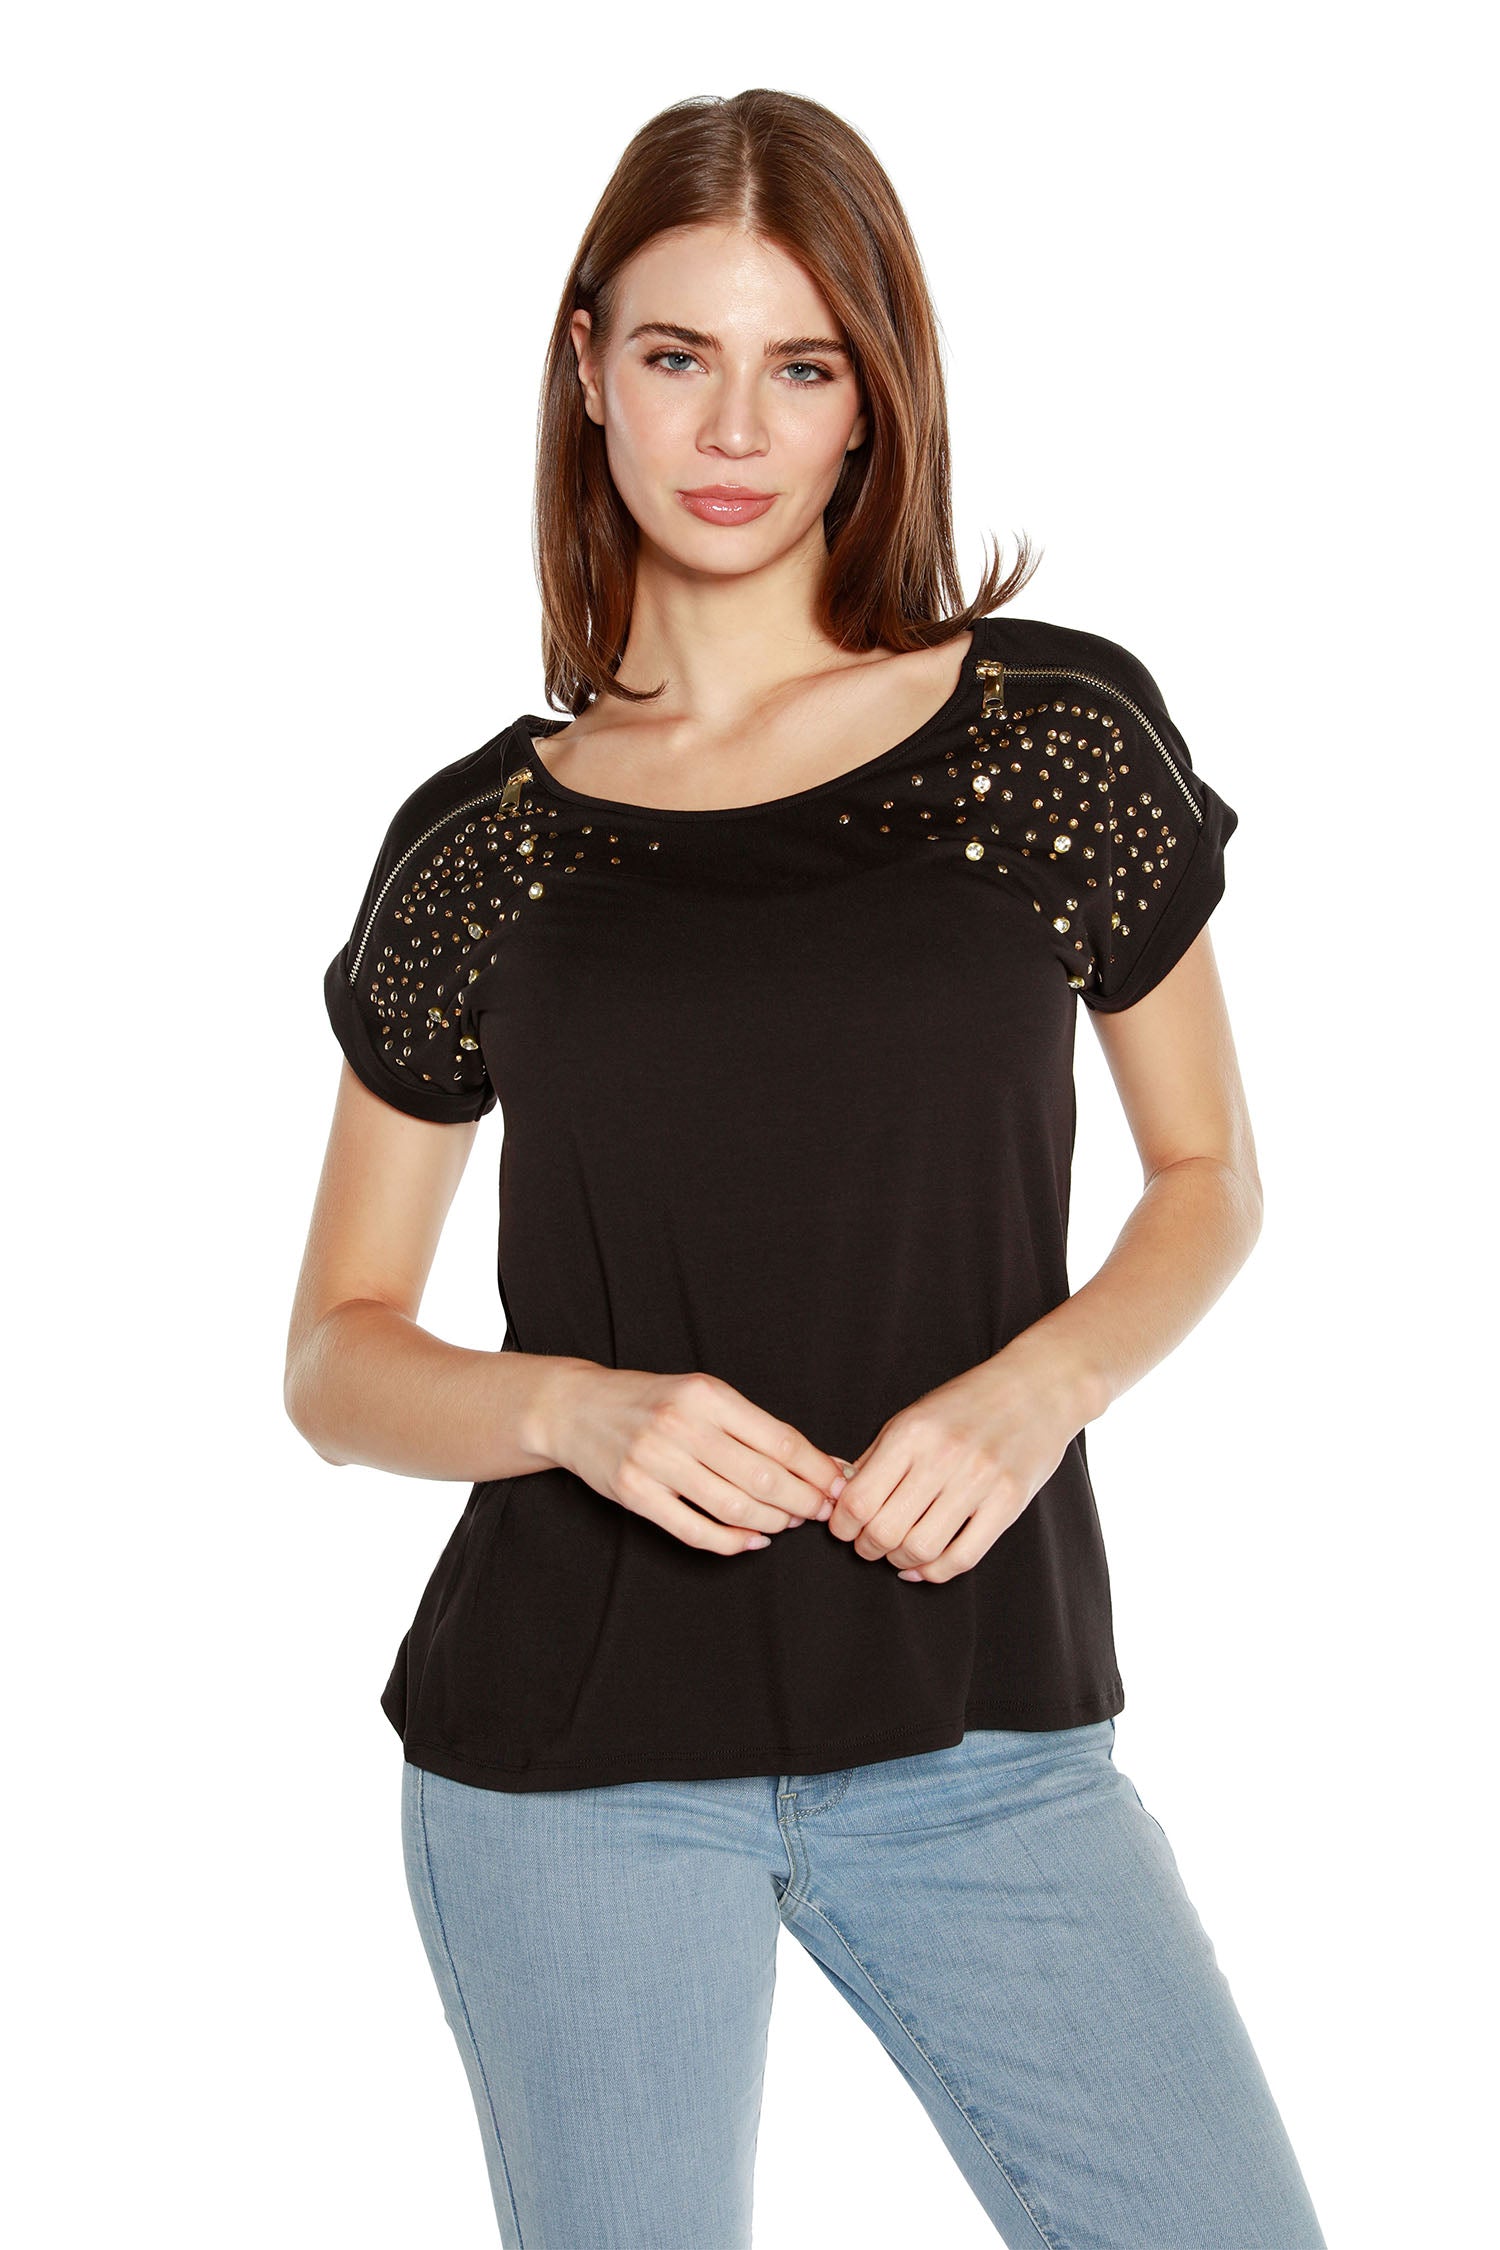 Women's Cap Sleeve Top with Zippers, Rhinestone and Stud Embellishments